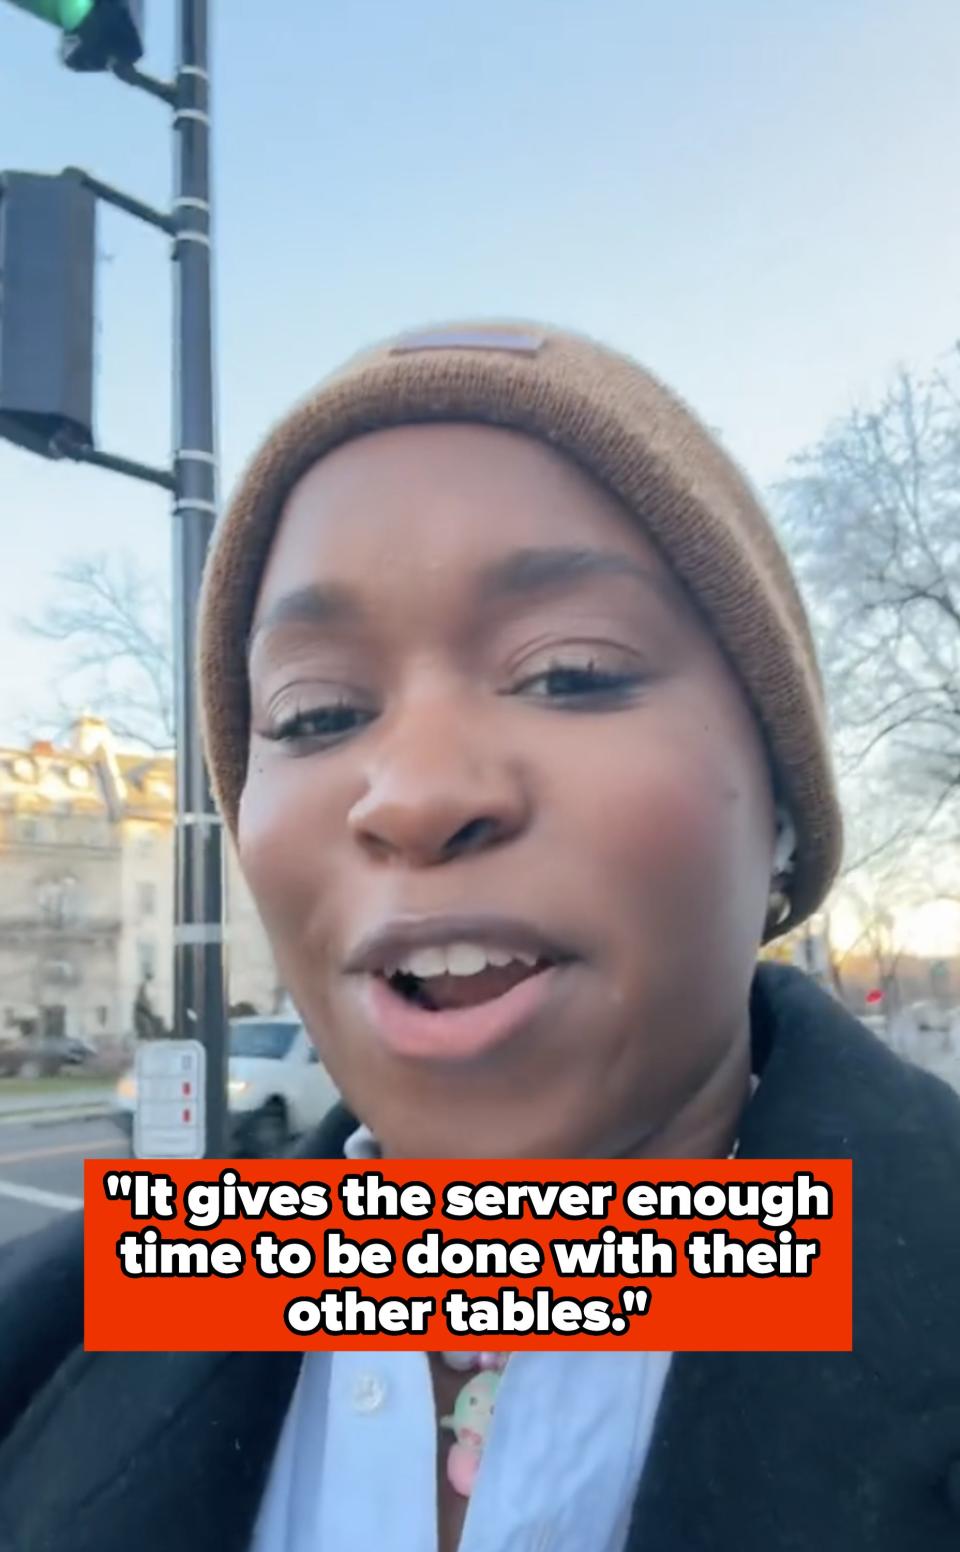 imani talking to the camera with a quote about servers managing tables effectively